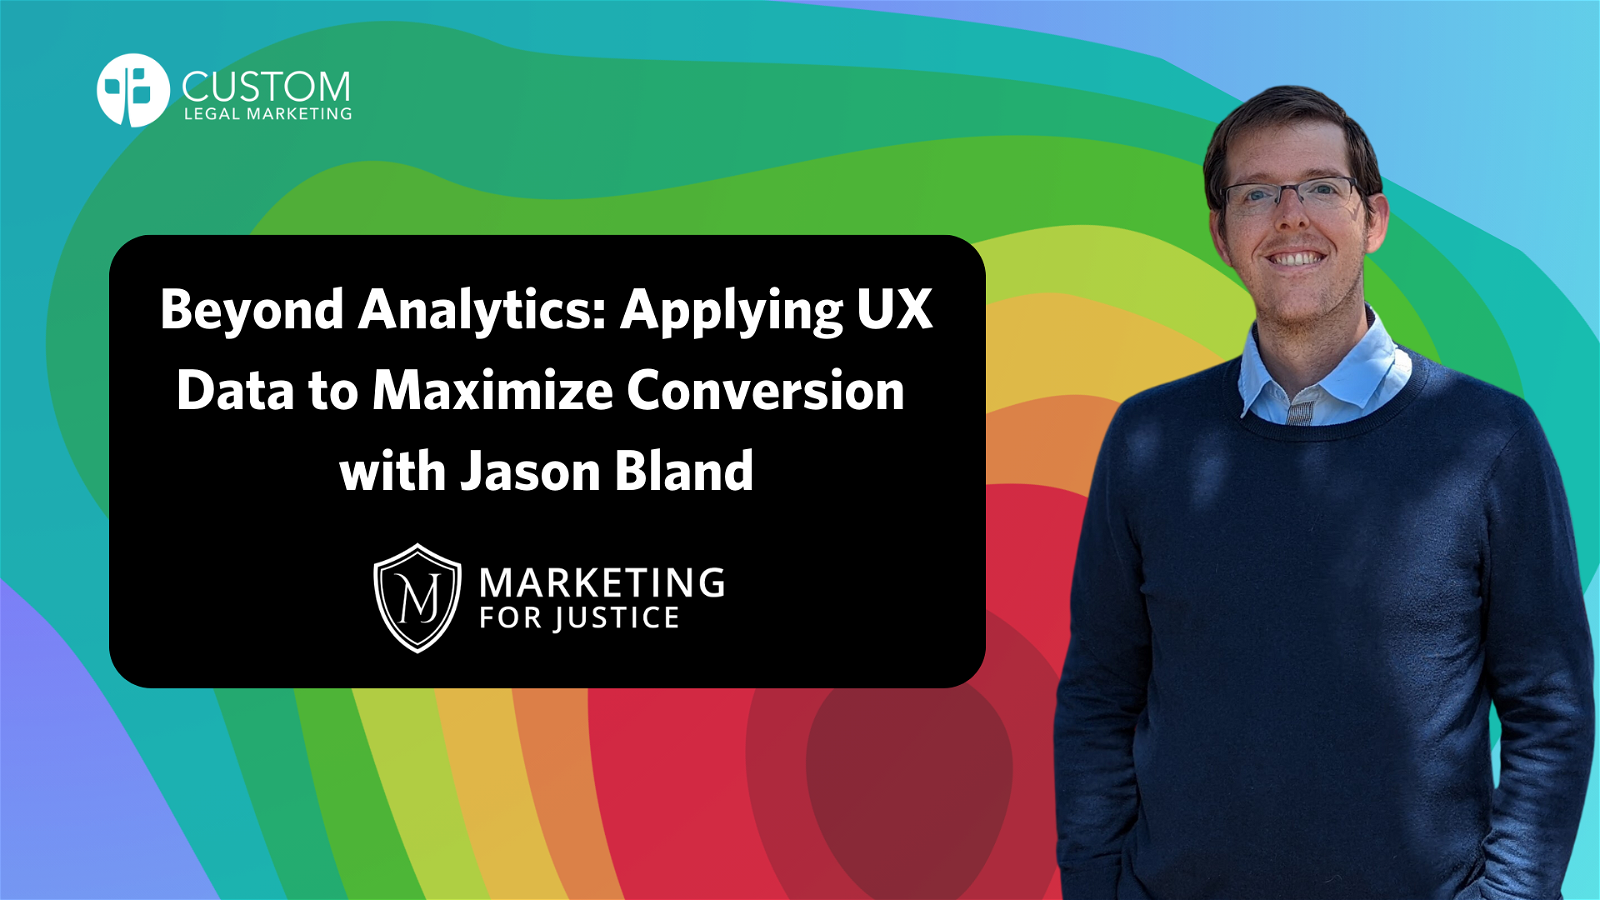 Free Workshop This Week on User Experience Optimization for More Conversions